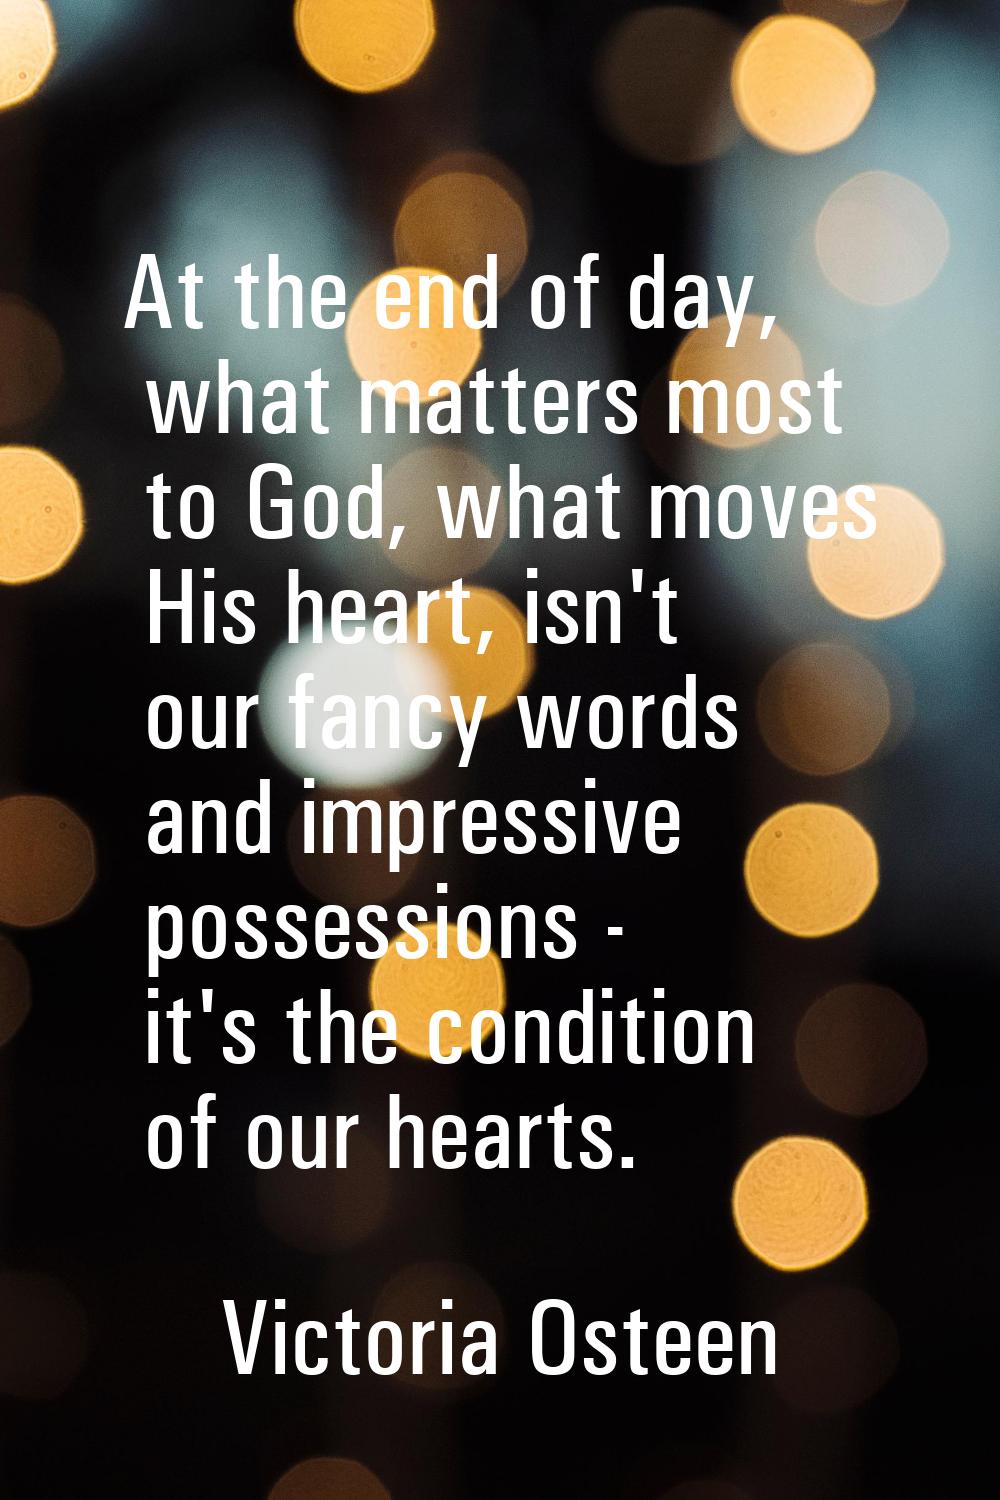 At the end of day, what matters most to God, what moves His heart, isn't our fancy words and impres